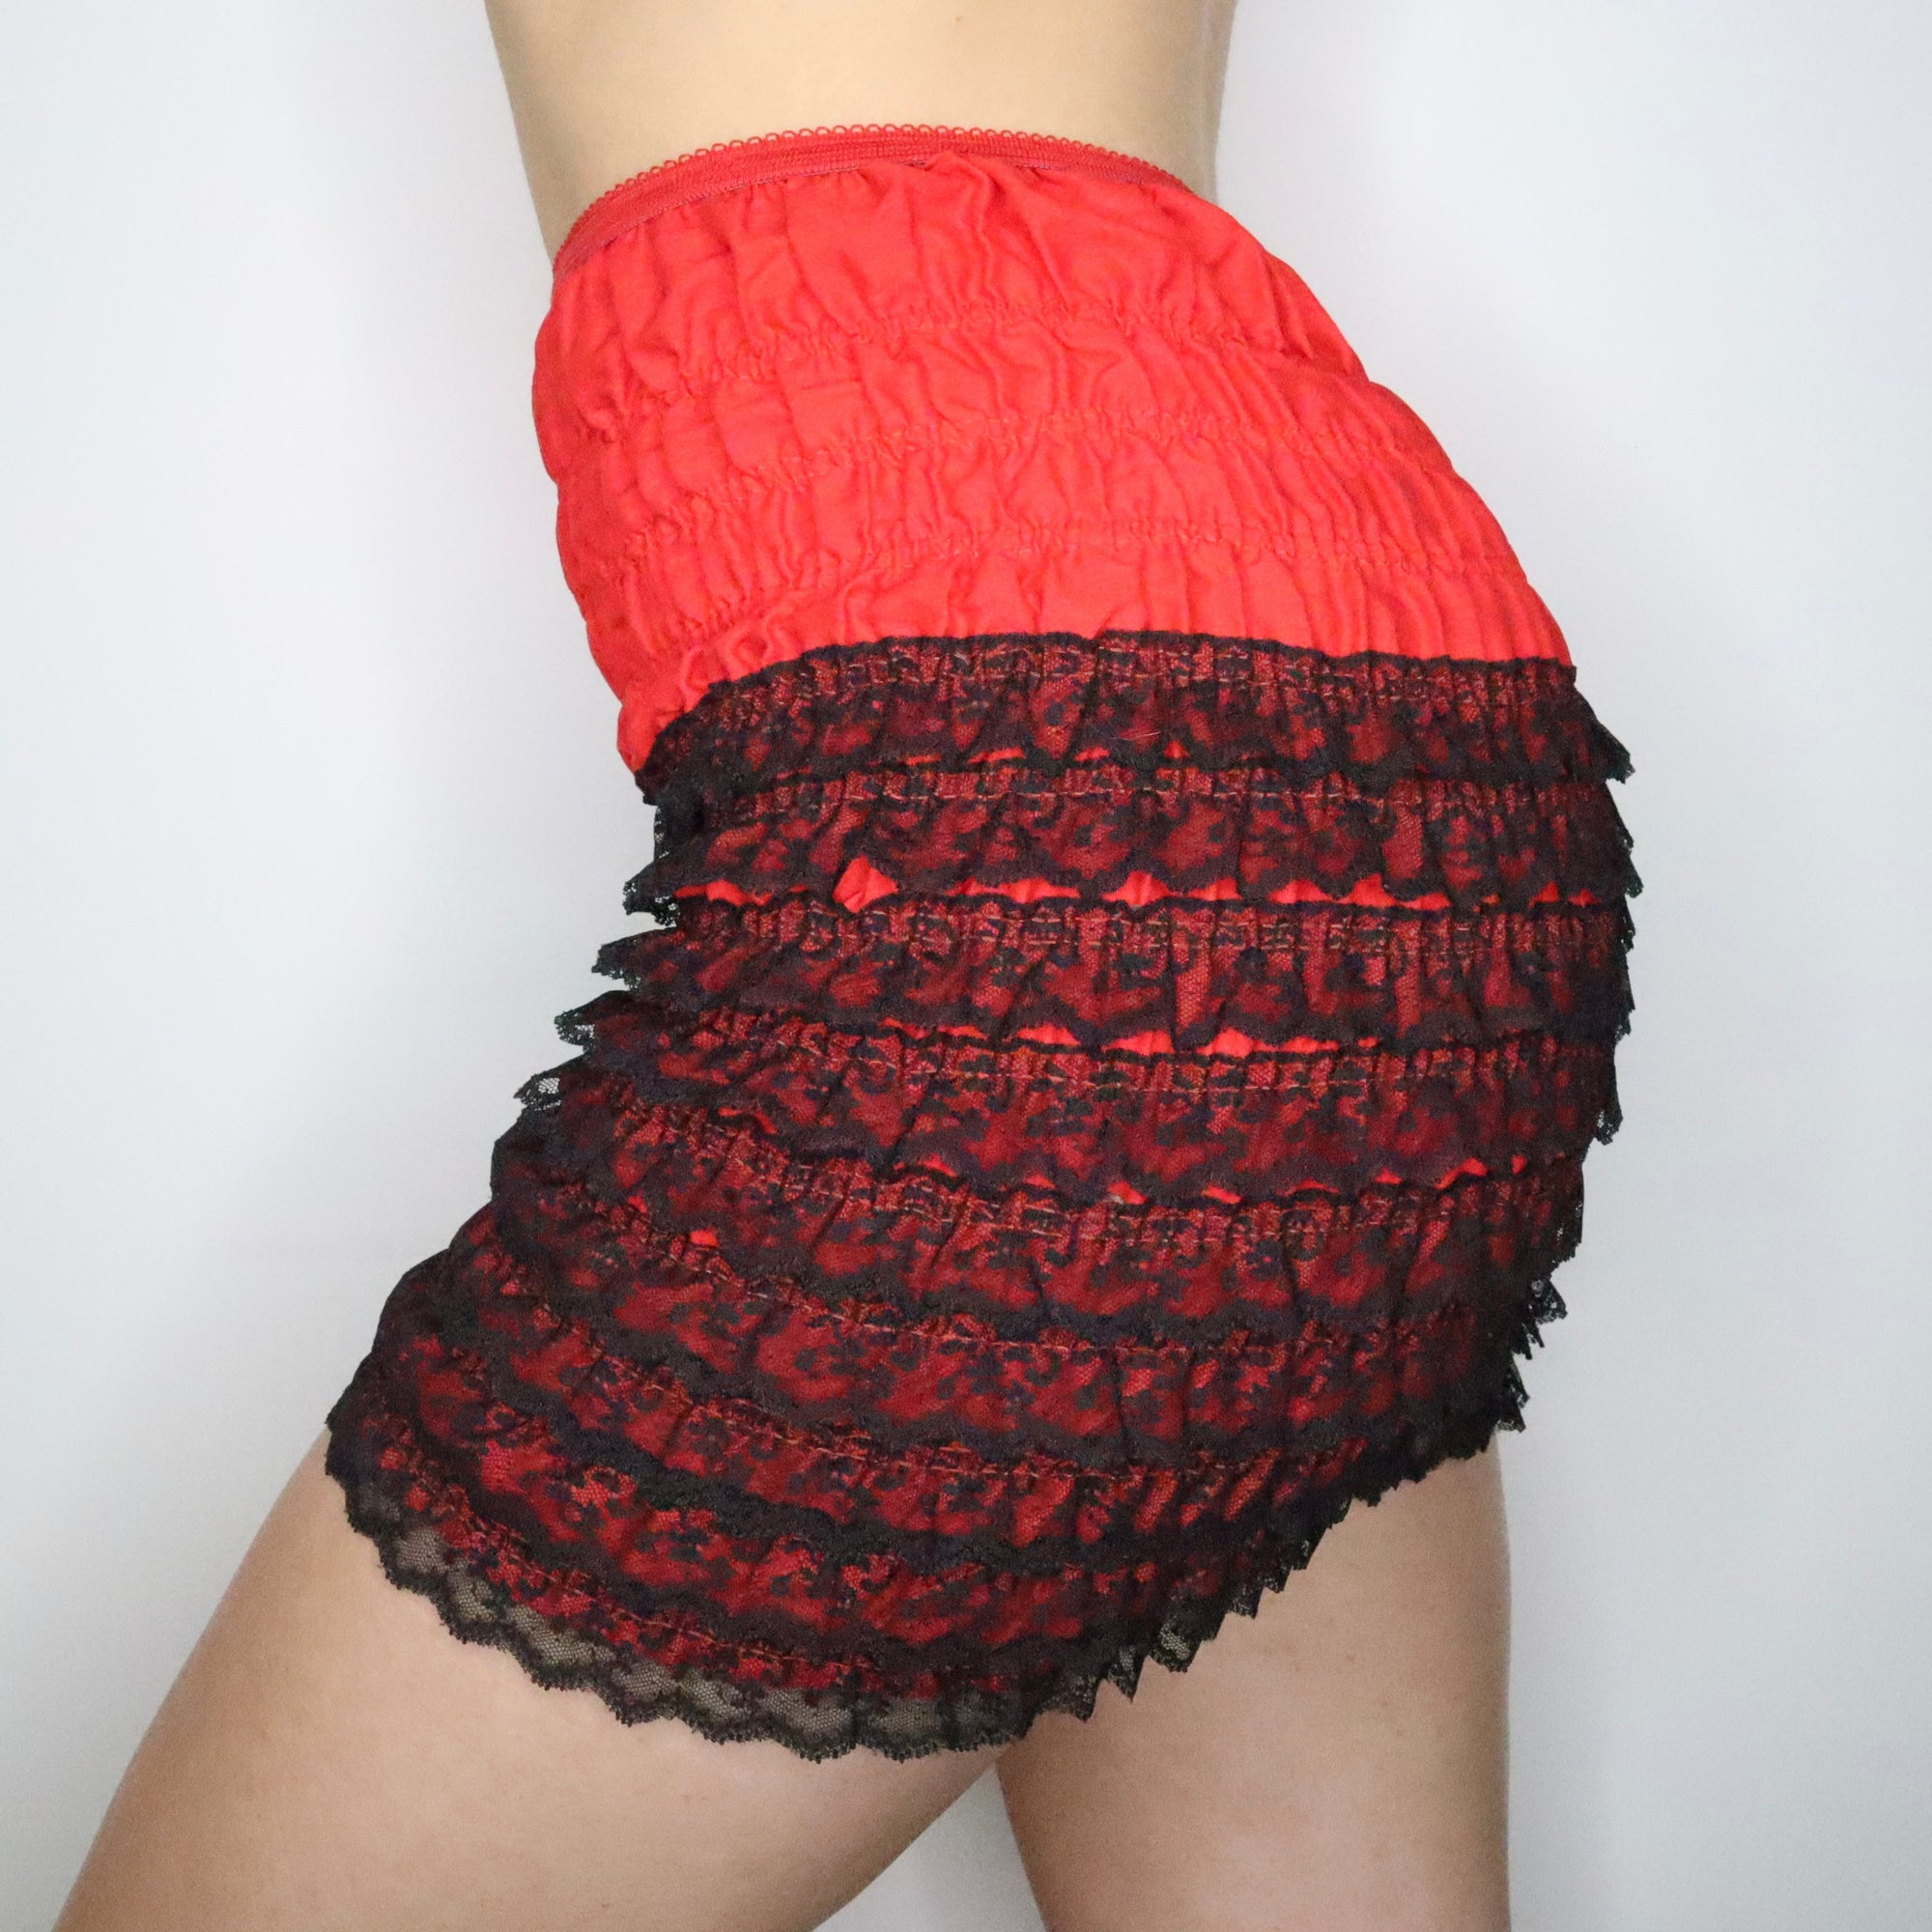 Red Ruffle Lace Bloomers (Small)